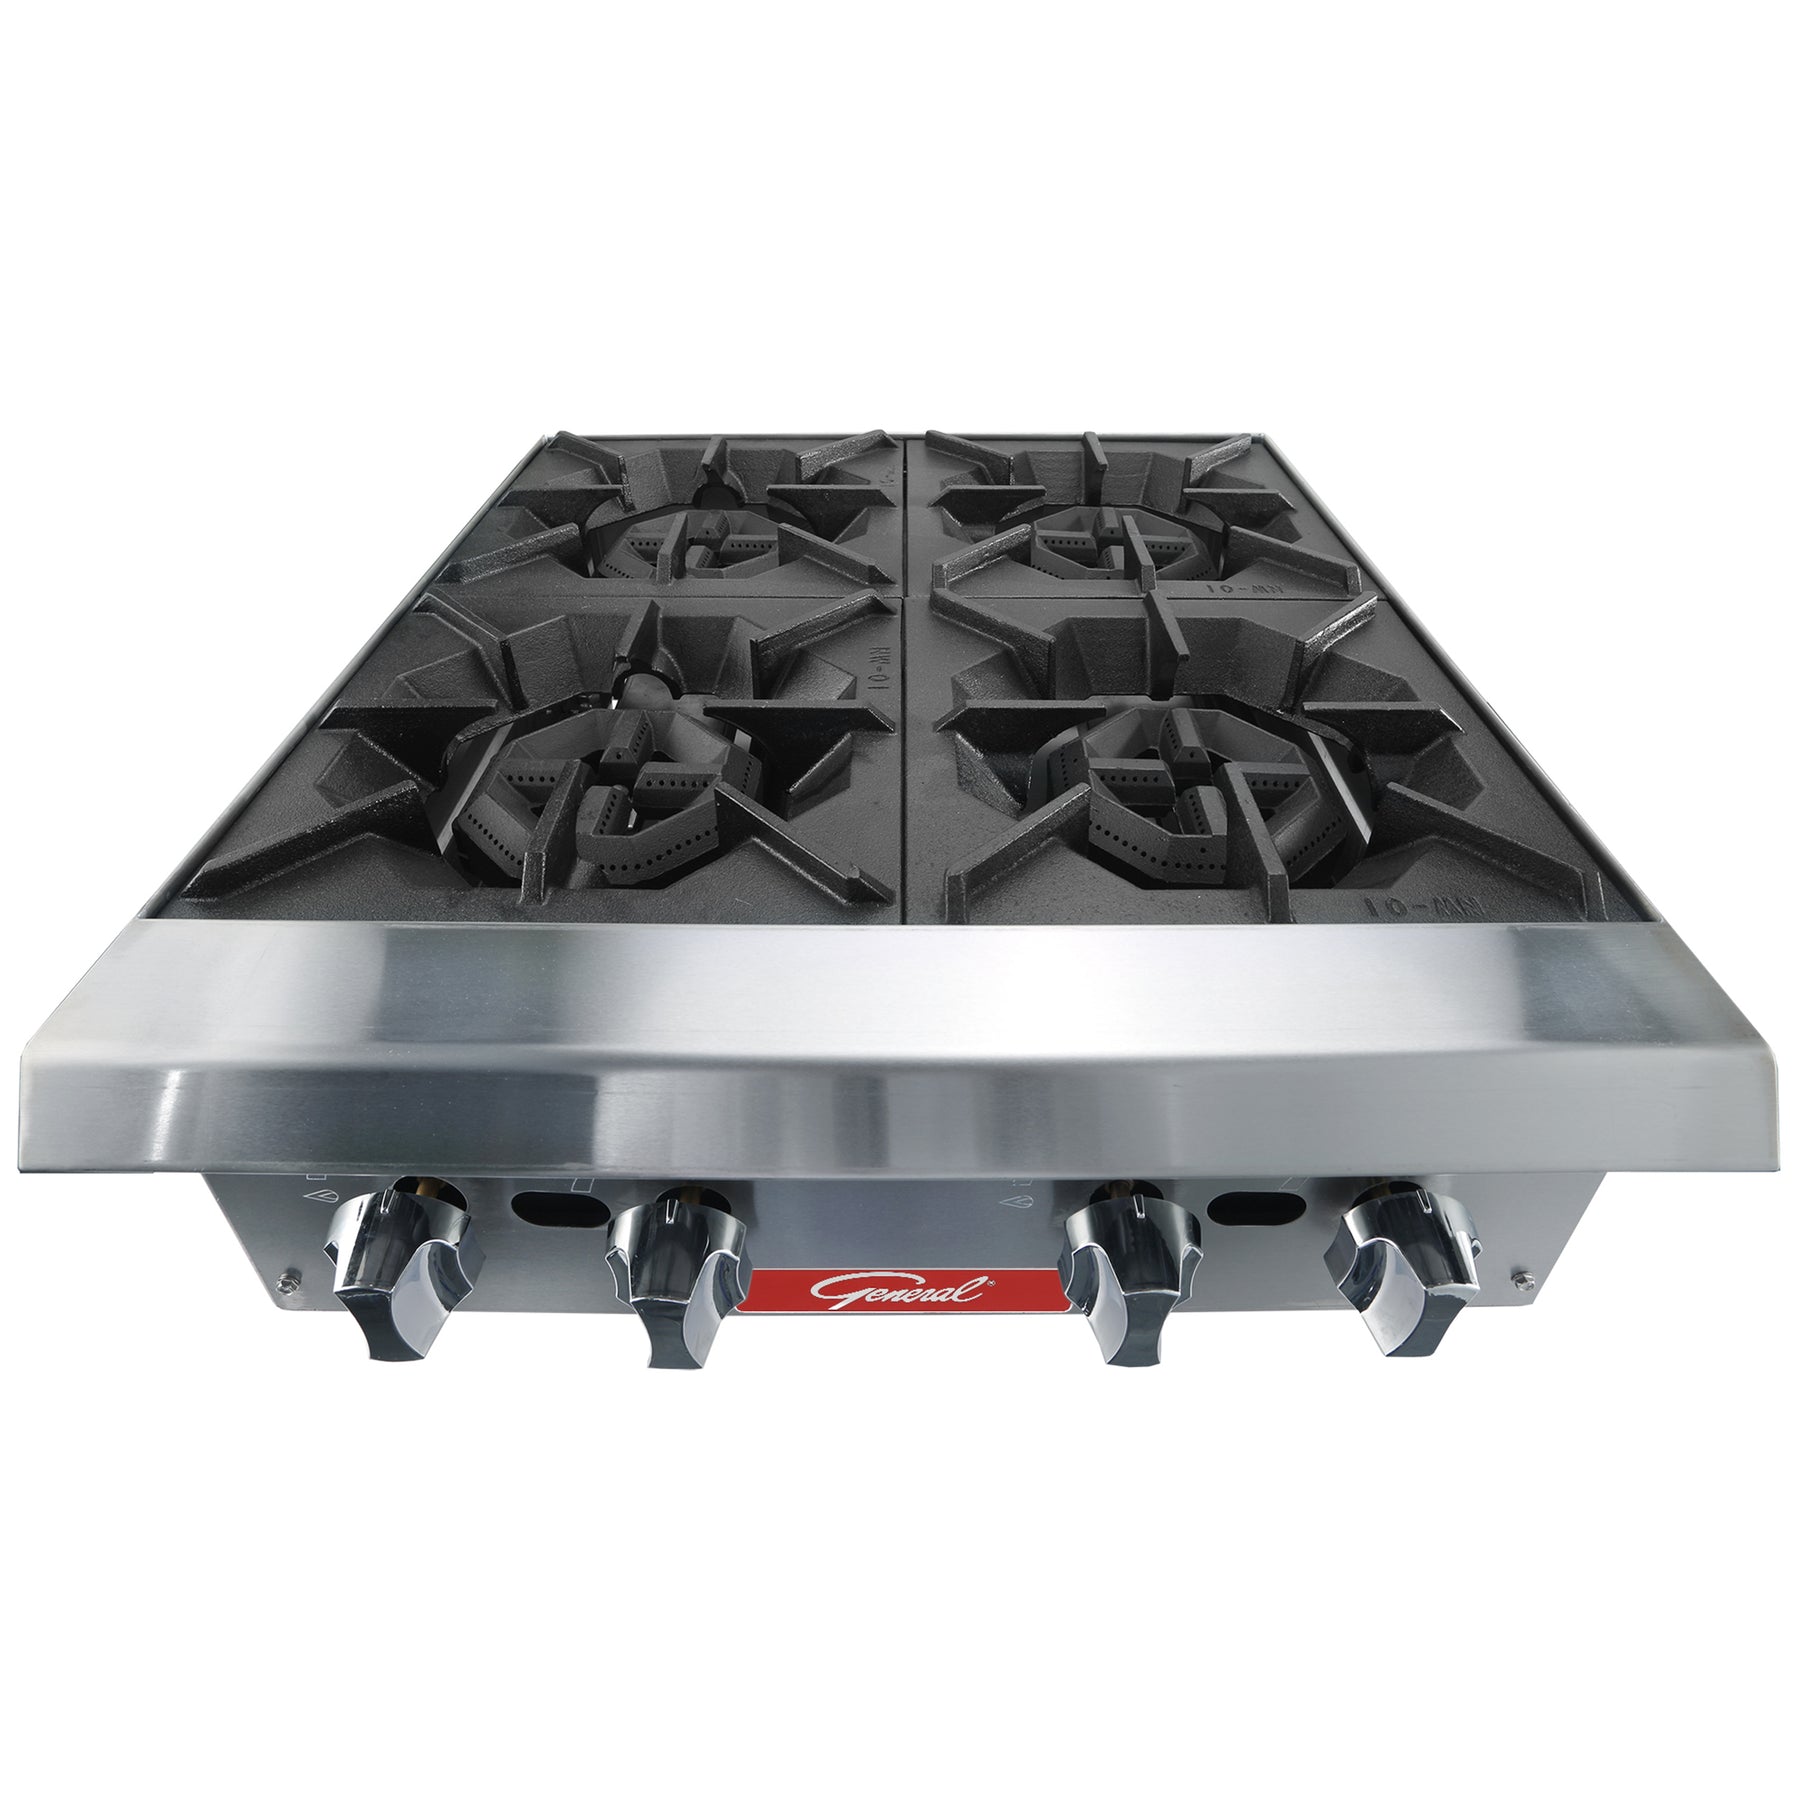 Griddles for Cooking 24/ Flat Top Grill GCMG-24 - General Food Service